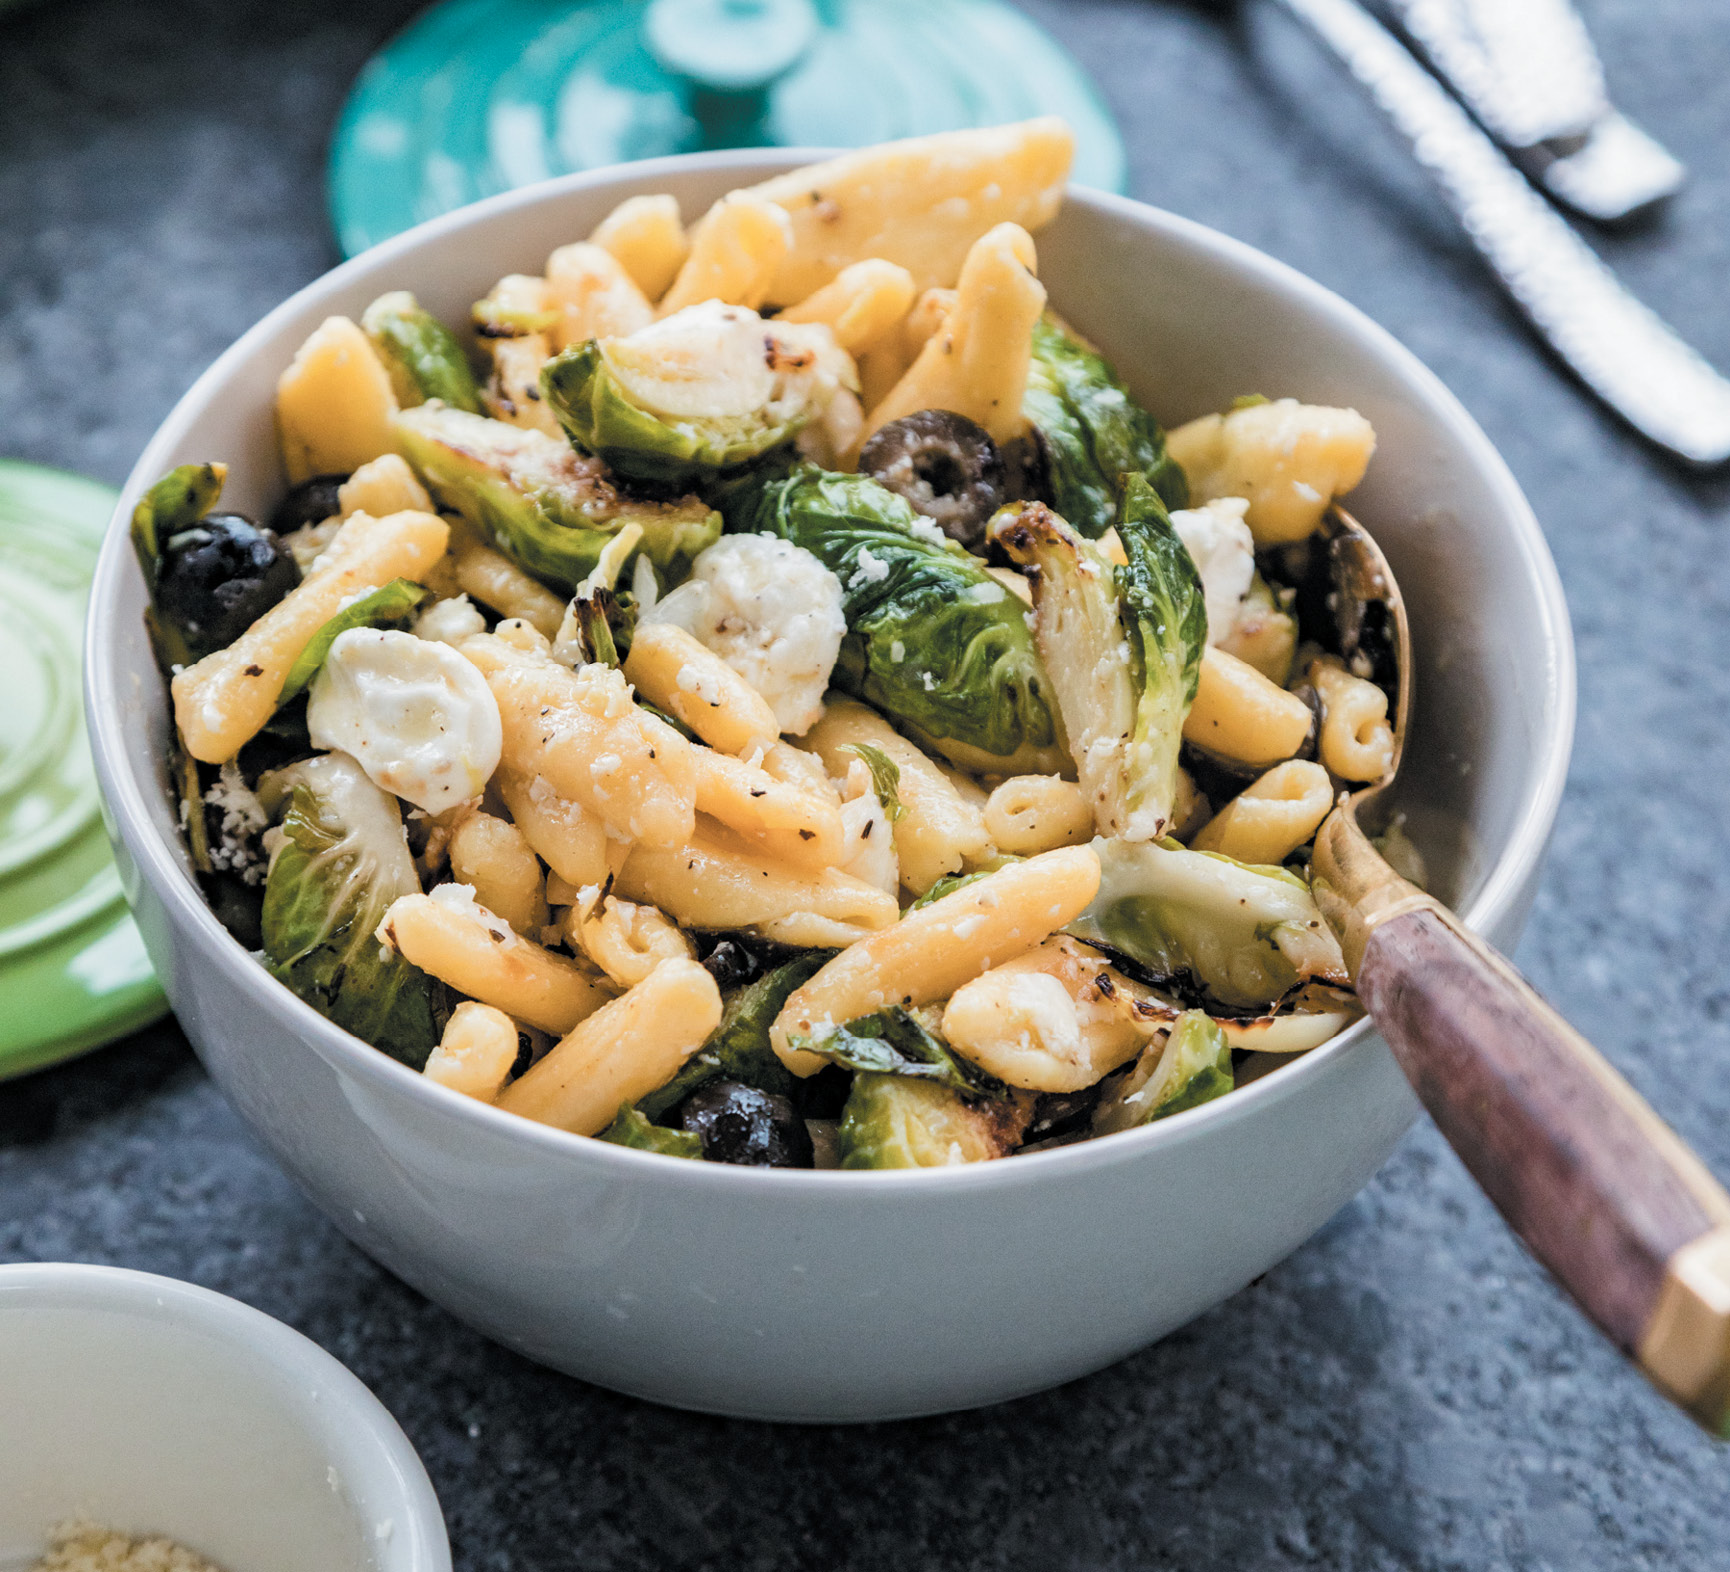 Pasta salad tossed with lemon-pepper dressing can be served warm, cold, or at room temperature. Postell likes to refrigerate the dish overnight—letting the flavors sink in—and serve it the next day.